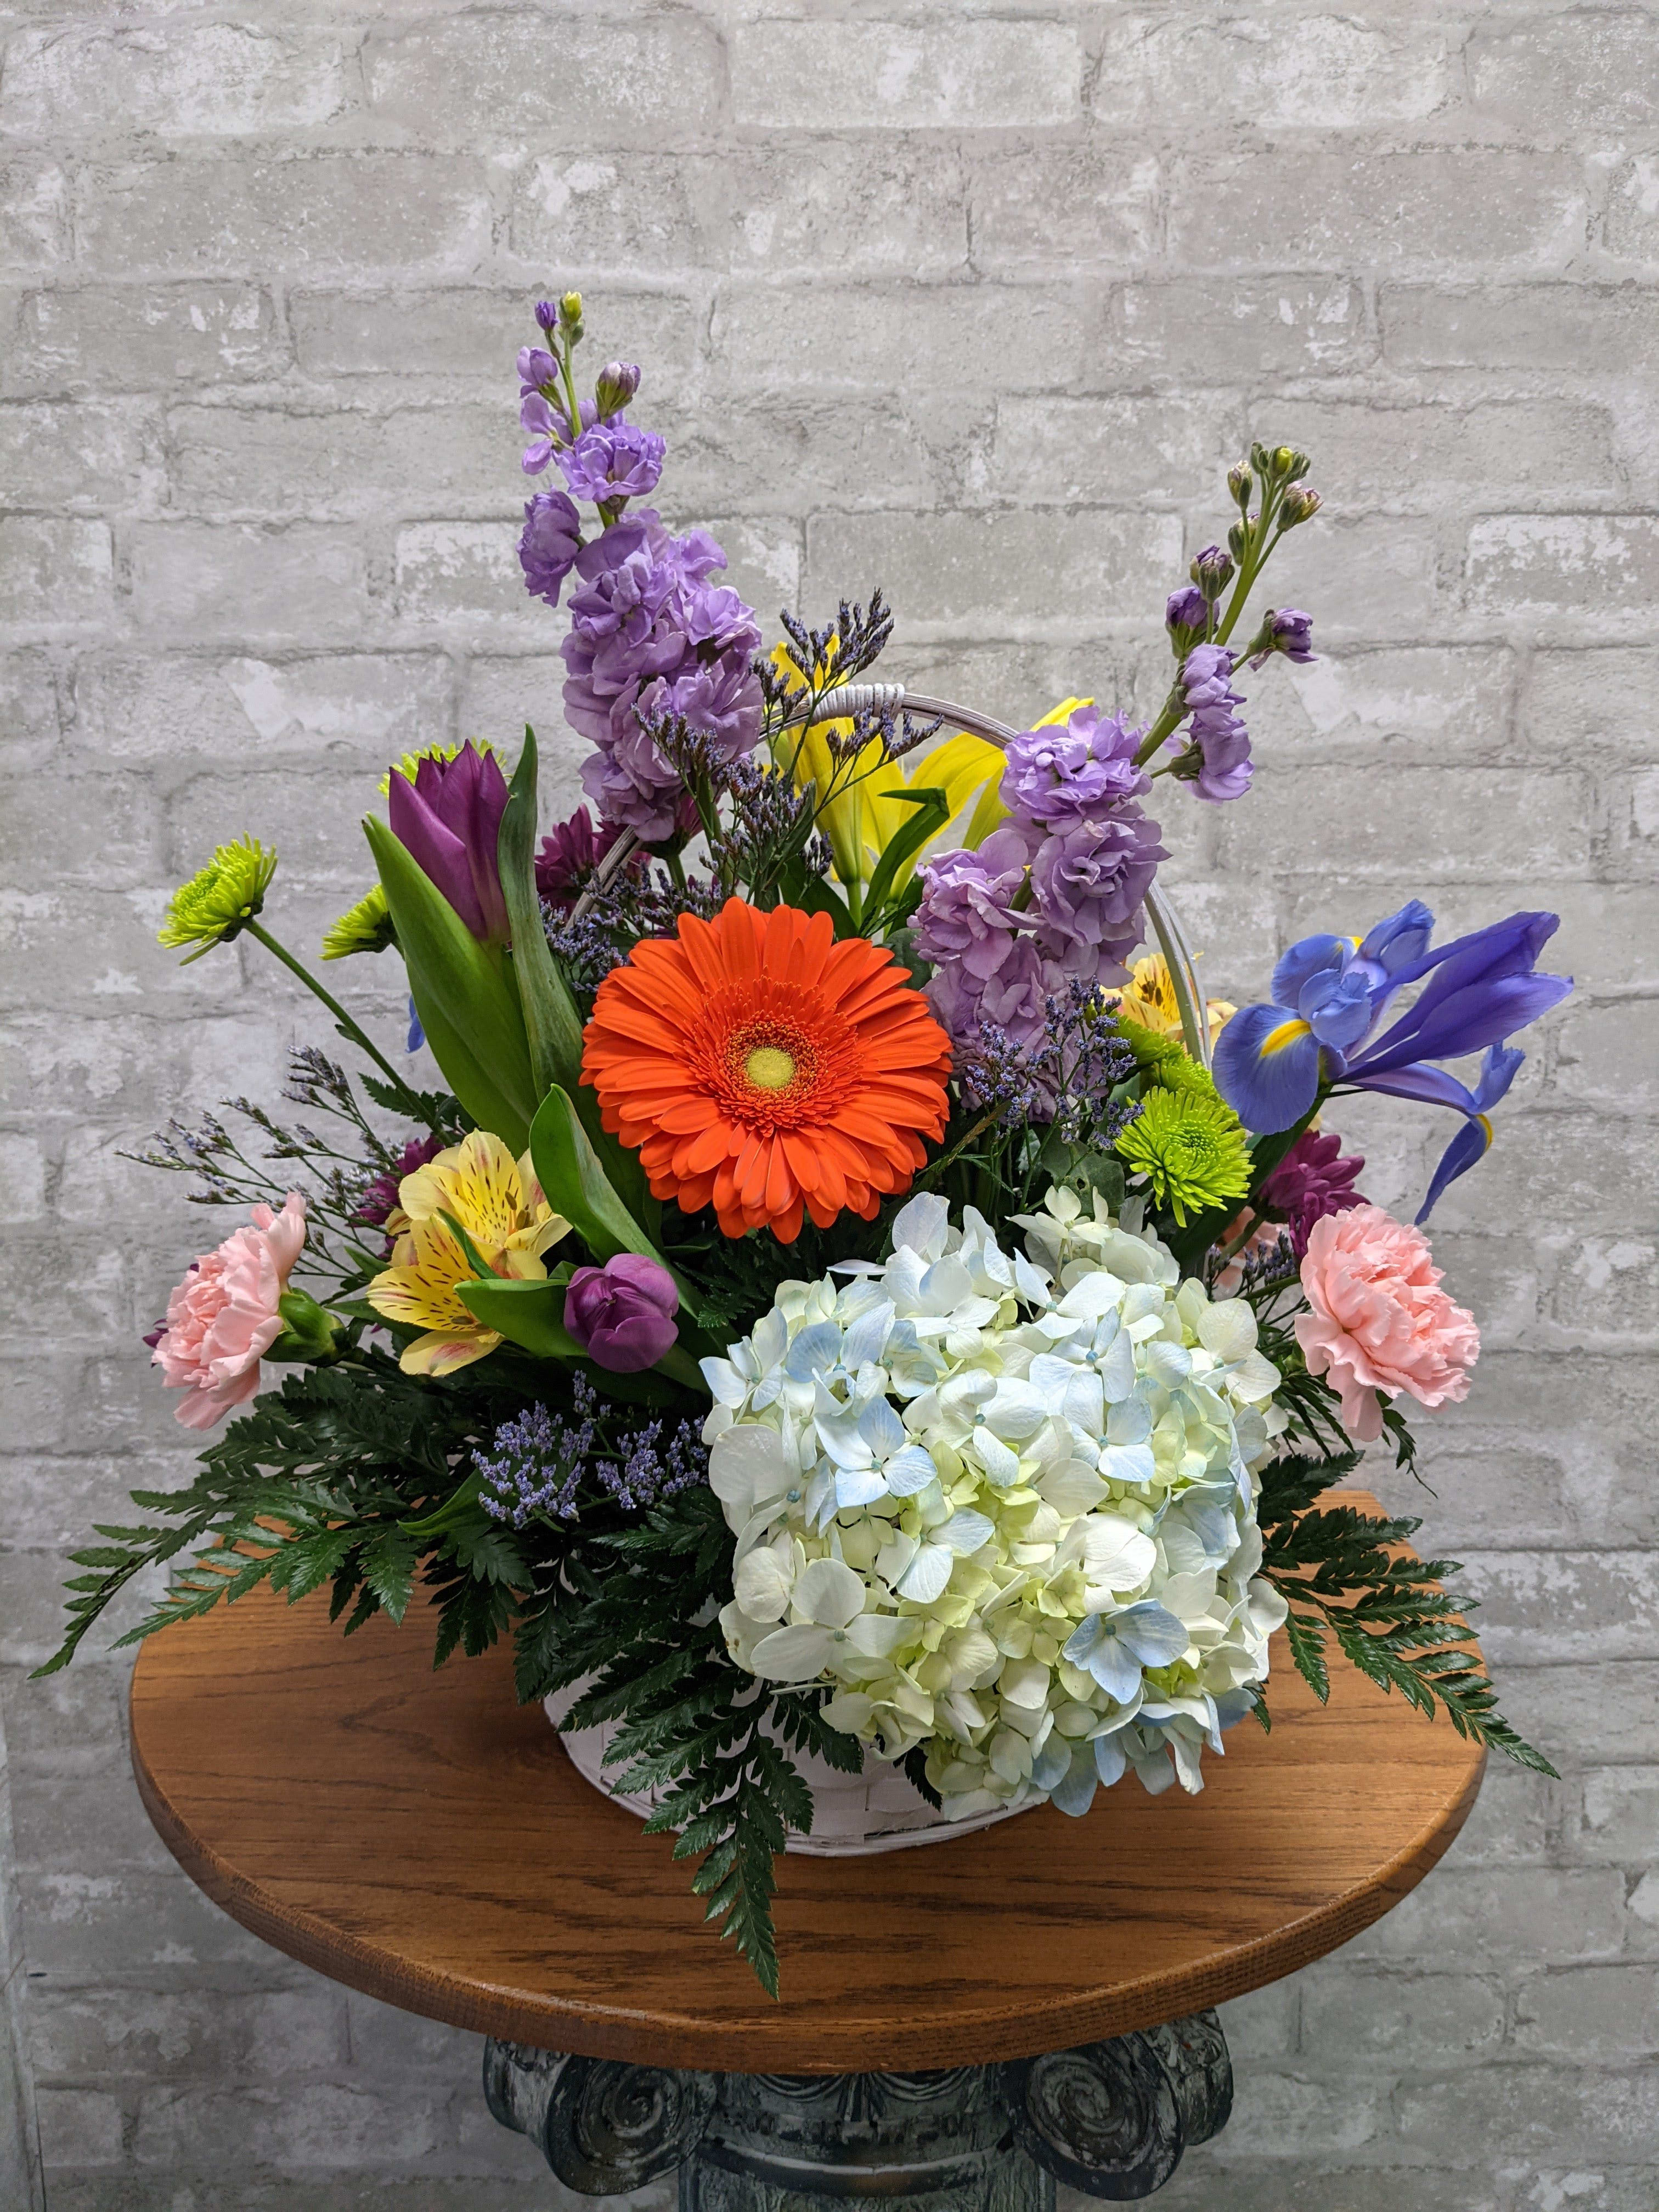 Grand Easter Basket FG553 - Large round wicker basket full of beautiful spring flowers.    Approximately 21&quot; H x 19&quot; W.